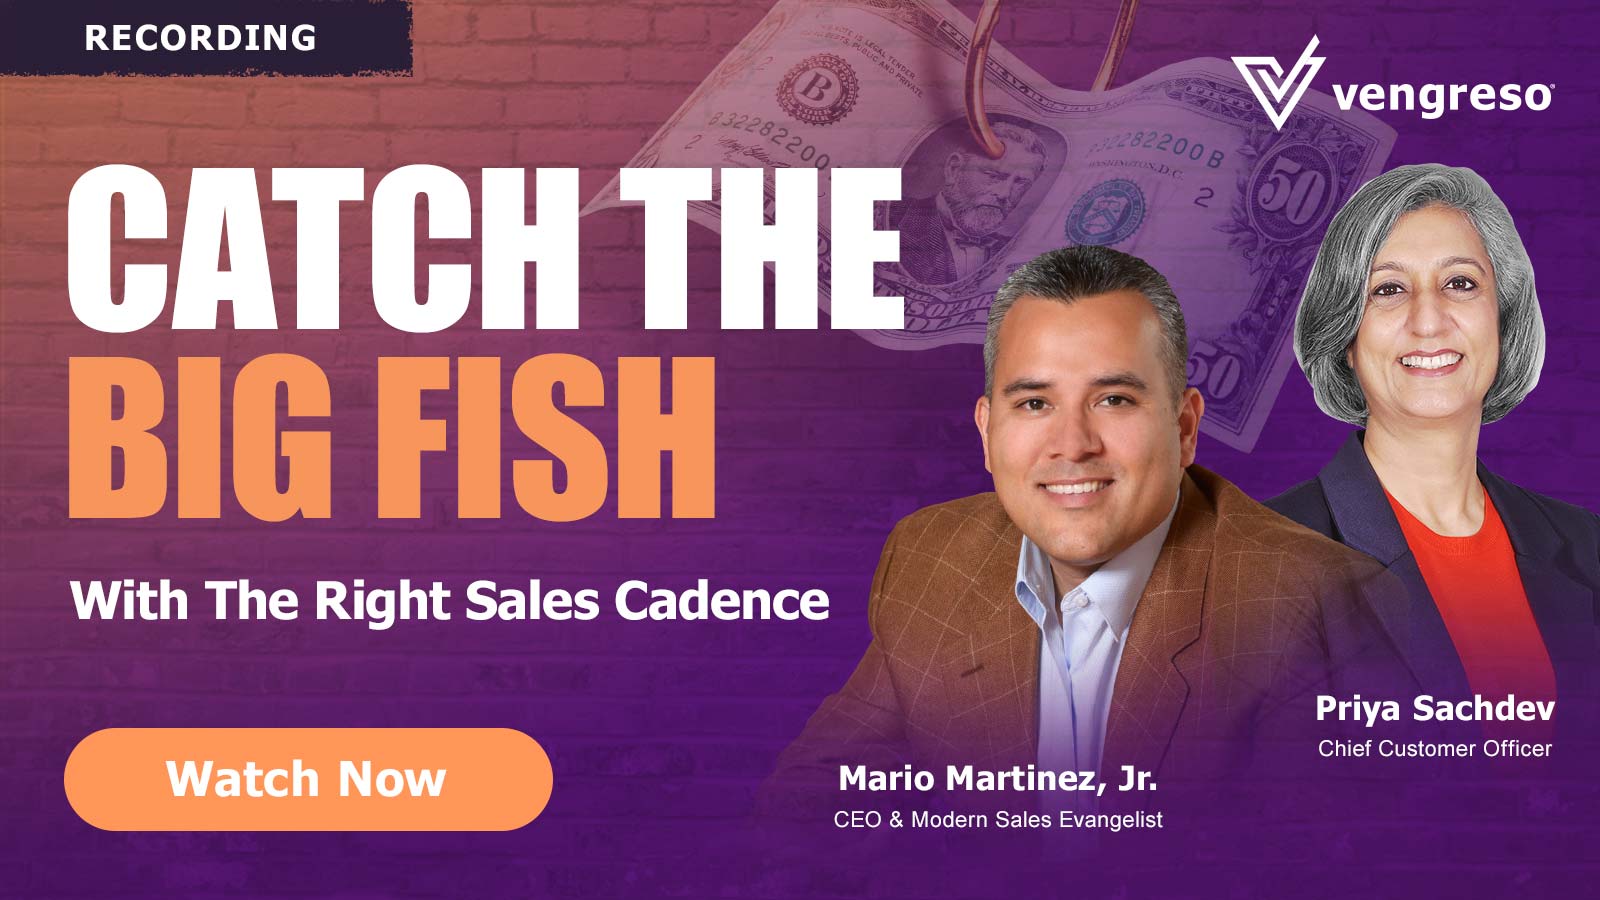 CATCH THE BIG FISH with the Right Sales Cadence